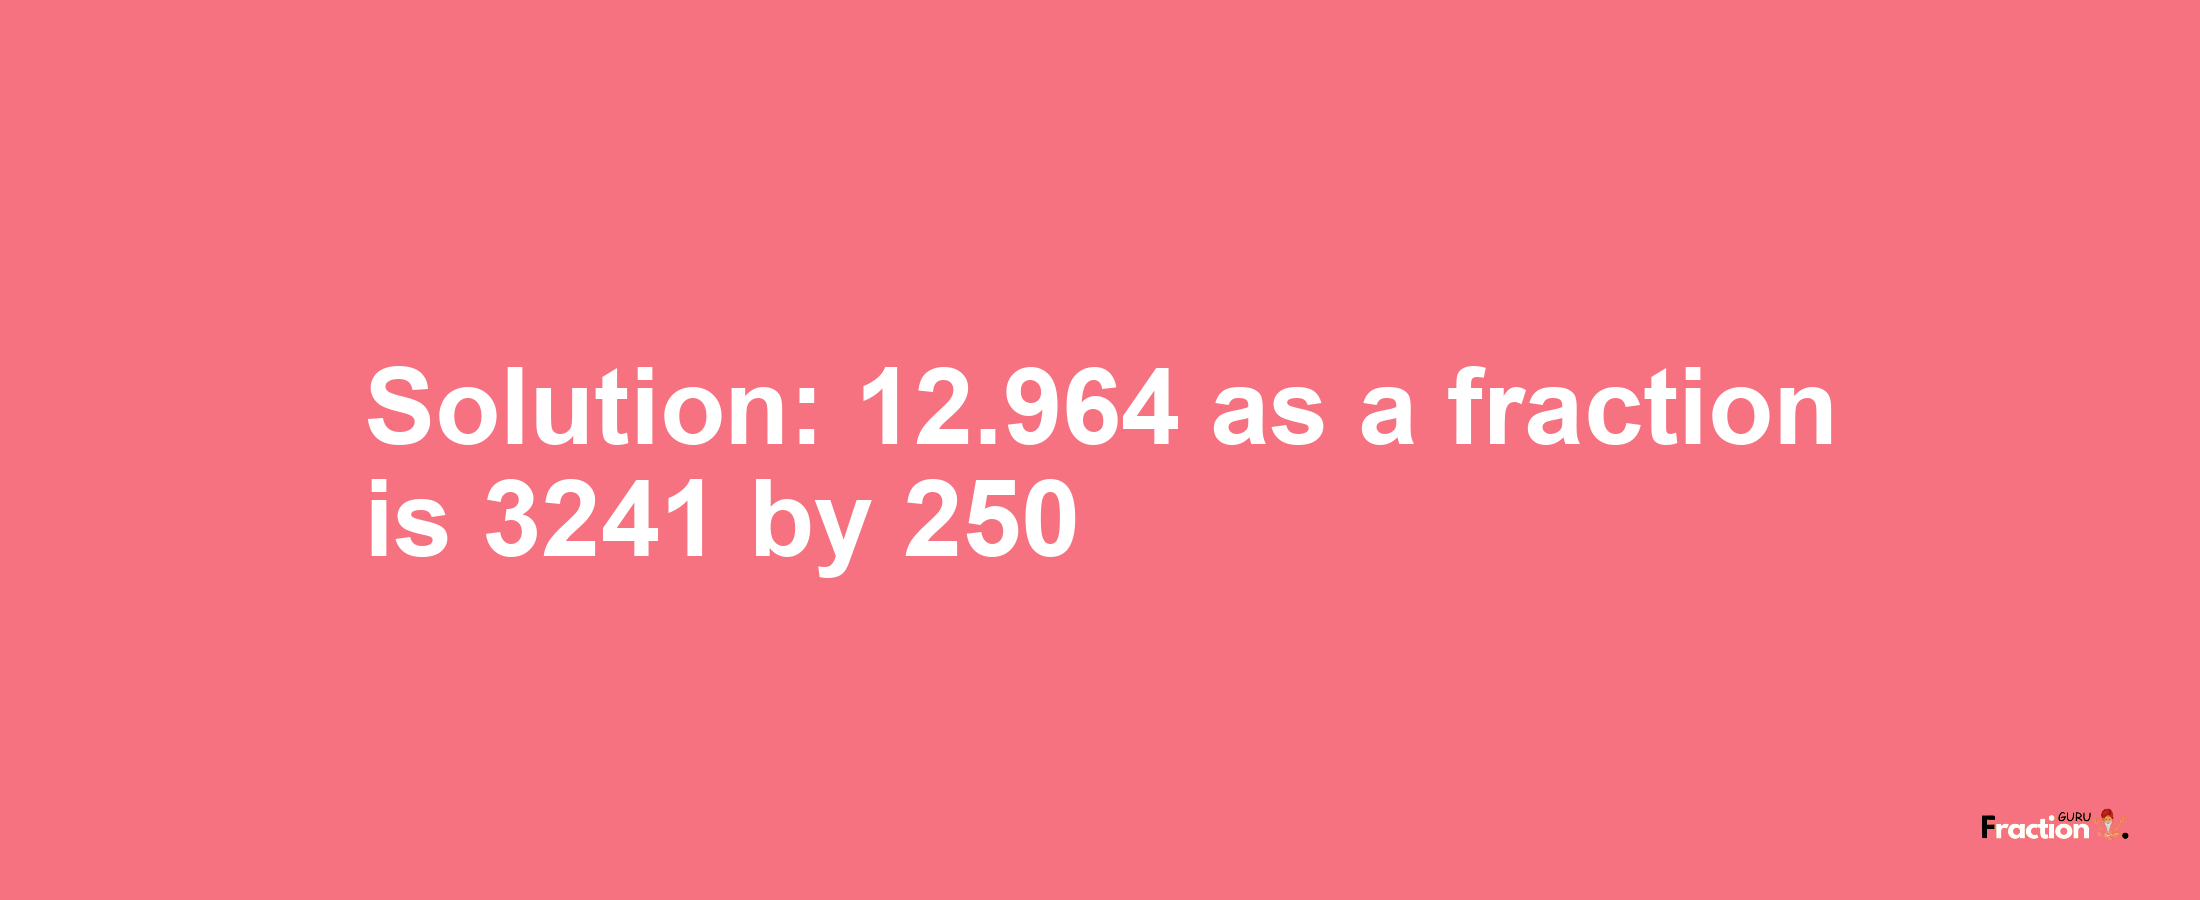 Solution:12.964 as a fraction is 3241/250